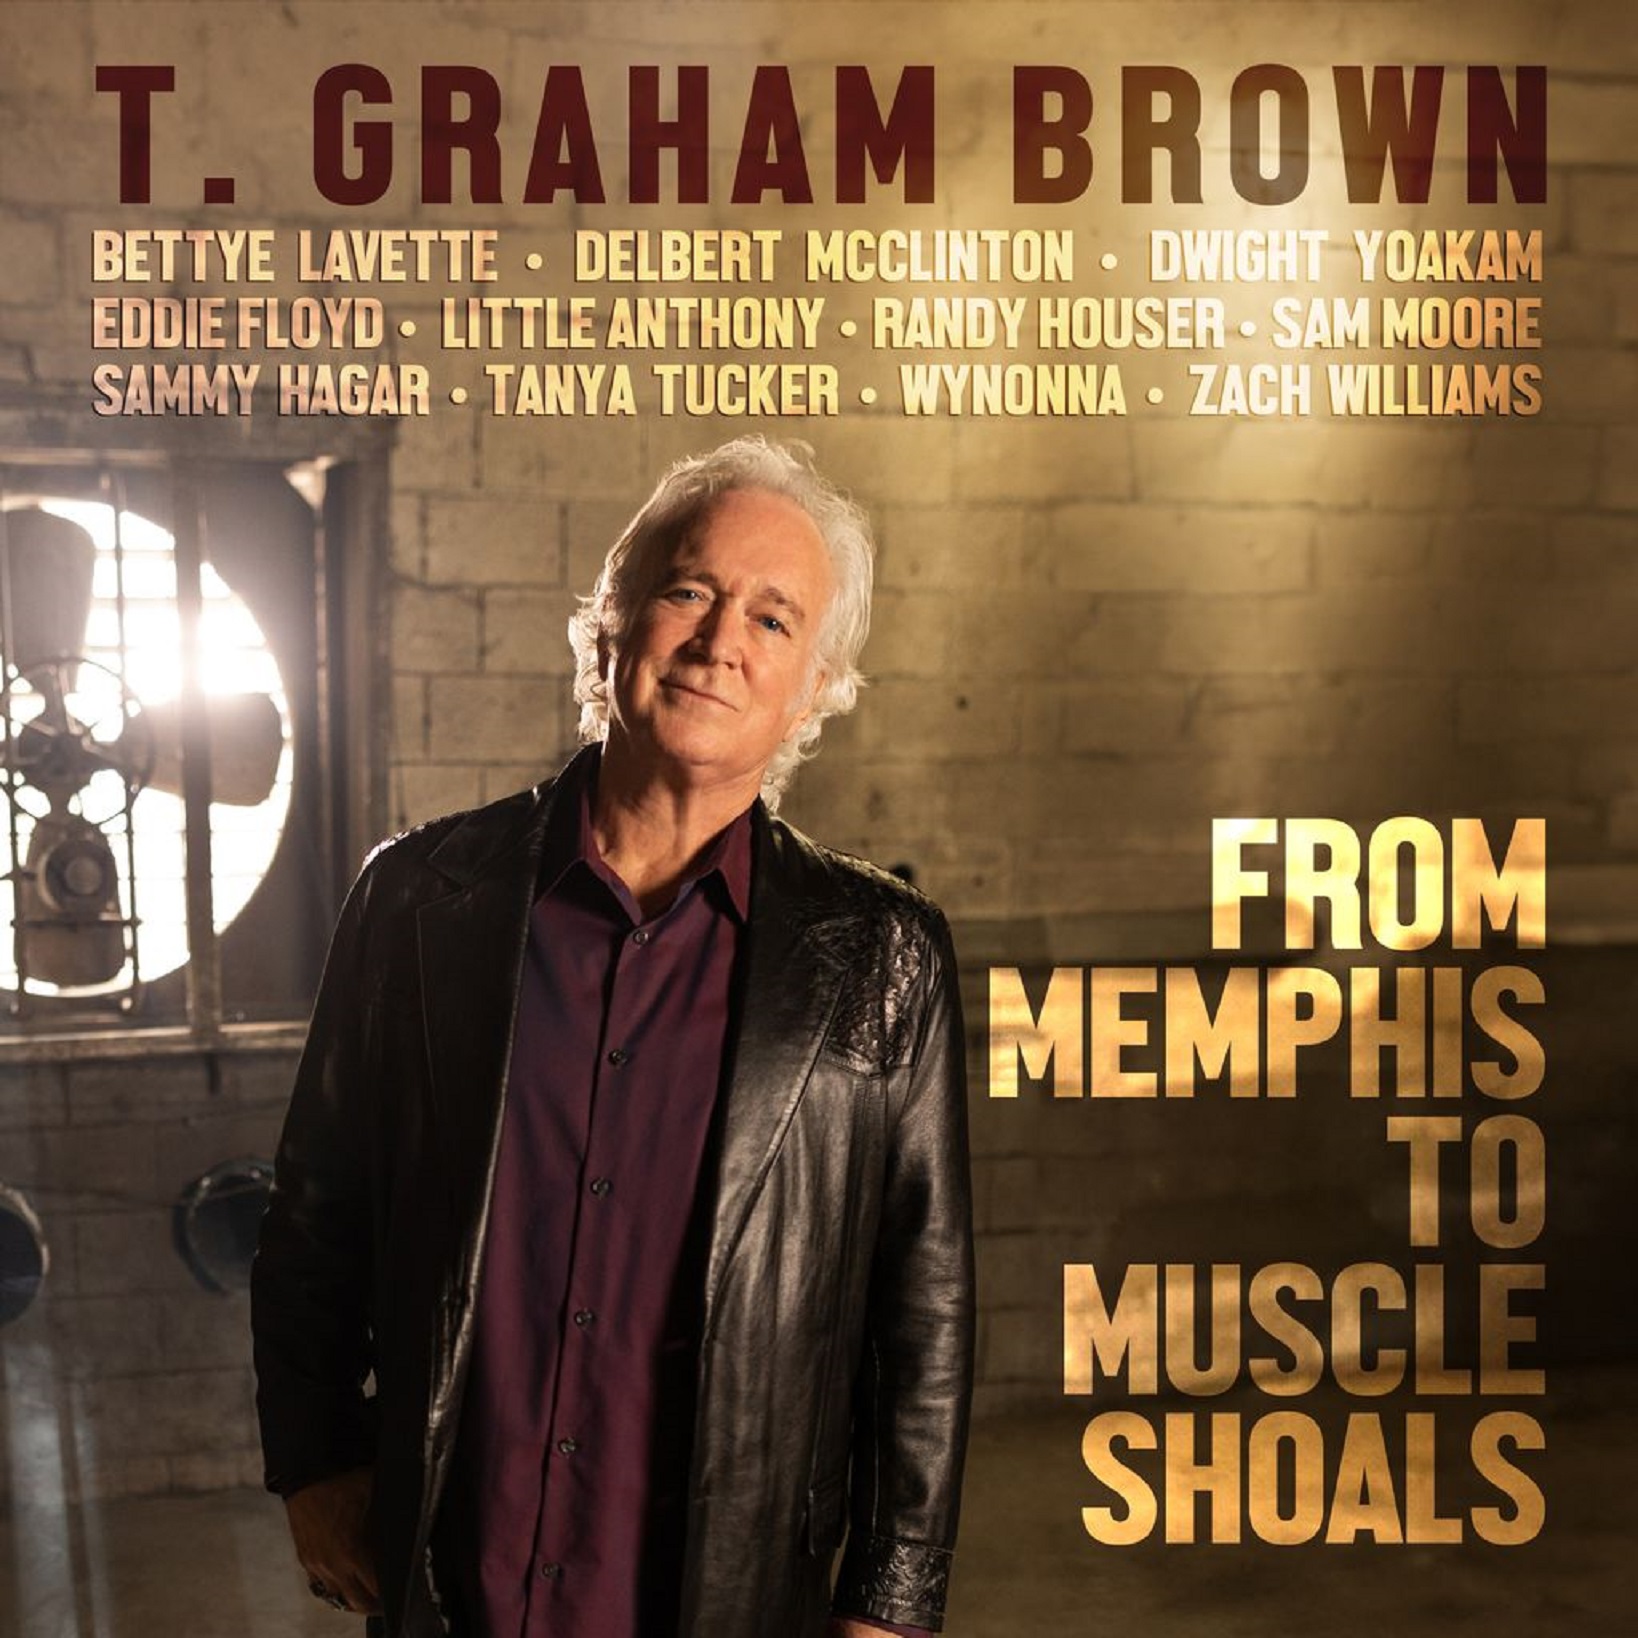 T. GRAHAM BROWN RELEASES SURPRISE TRACK "(SITTIN' ON) THE DOCK OF THE BAY" WITH RANDY HOUSER